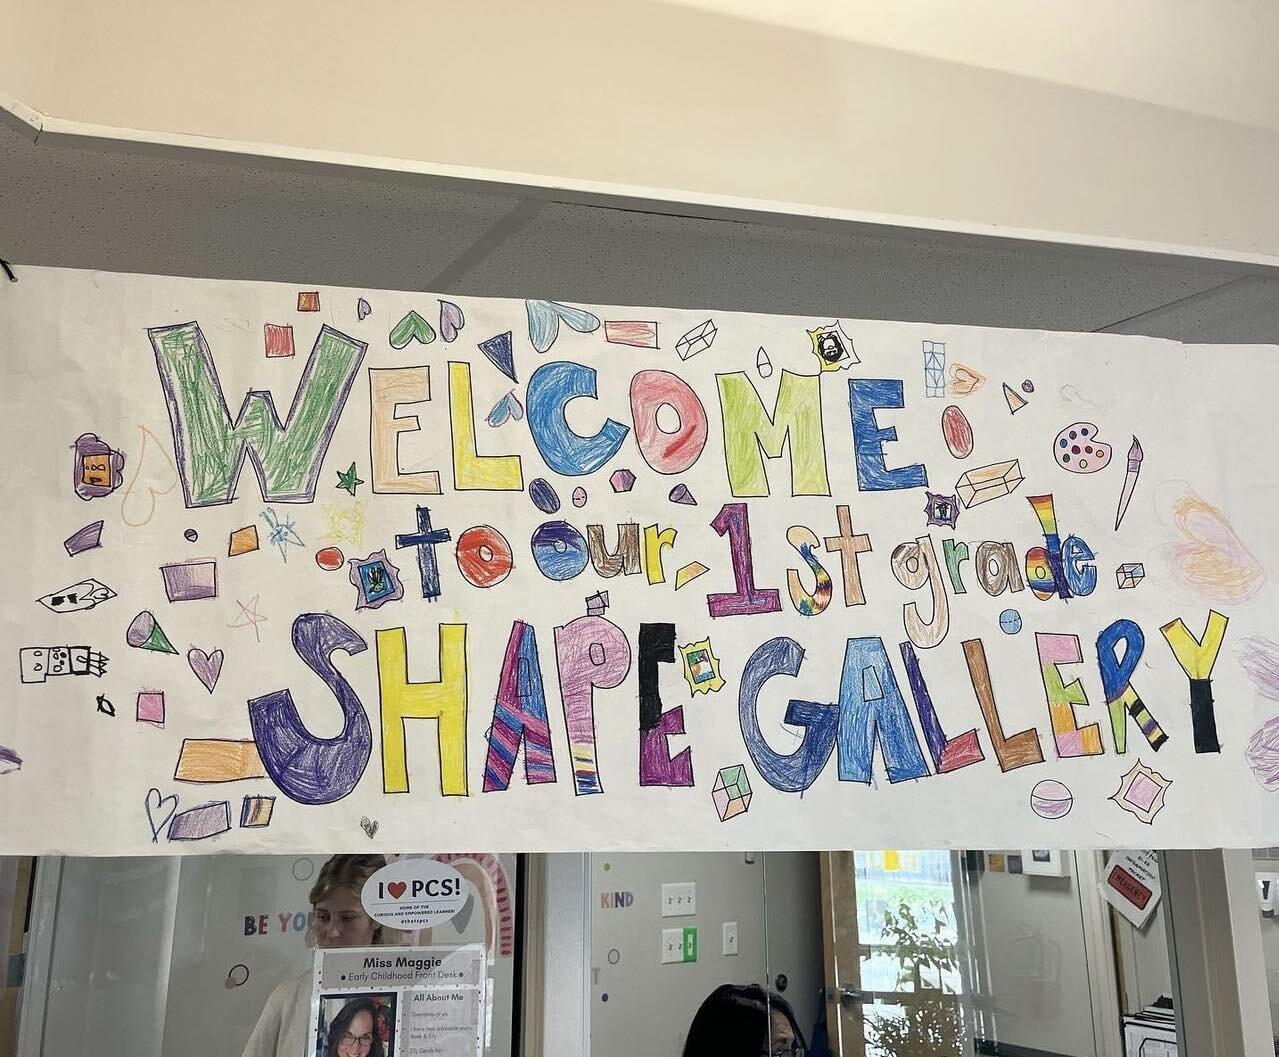 Presenting our 1st Grade Shape Gallery 🔴🔶🟡🟩🔷🟪

These creative young artists worked so incredibly hard on all this beautiful artwork! 

We are so incredibly proud of them and thank you to all the families and friends who came out Tuesday night t